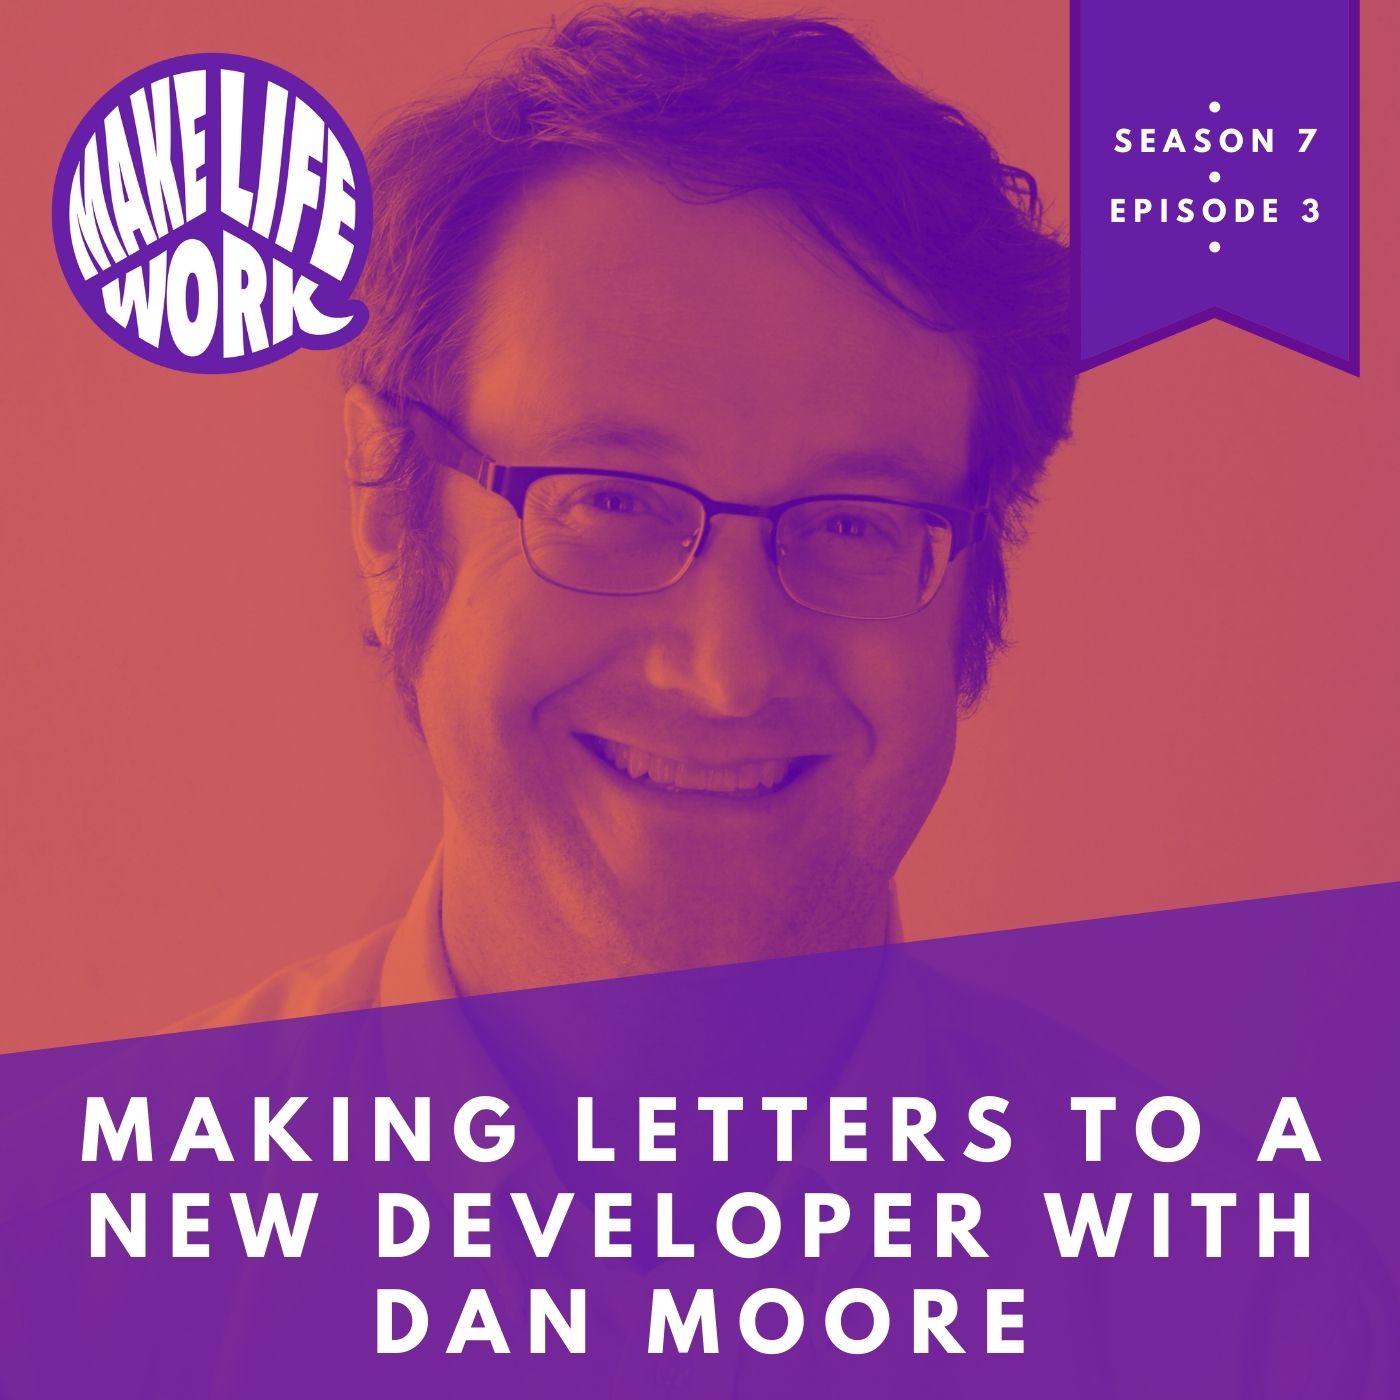 Making Letters to a New Developer with Dan Moore